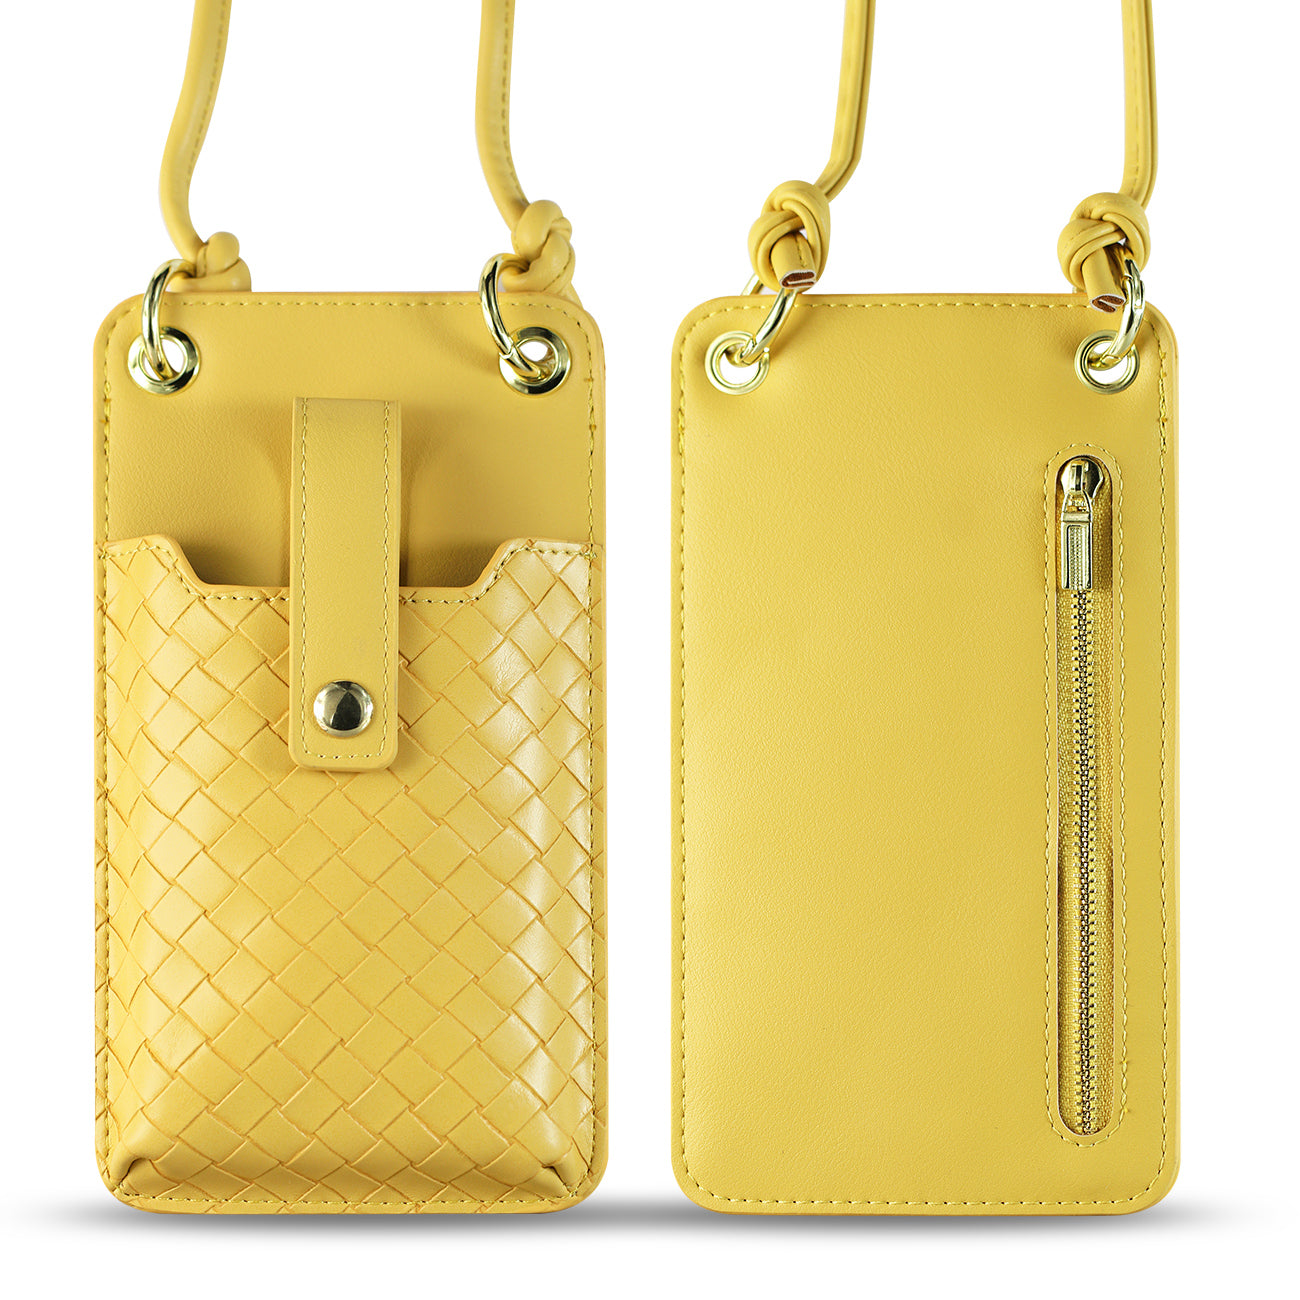 Reiko Leather Crossbody Phone Wallet Small Purse In Yellow